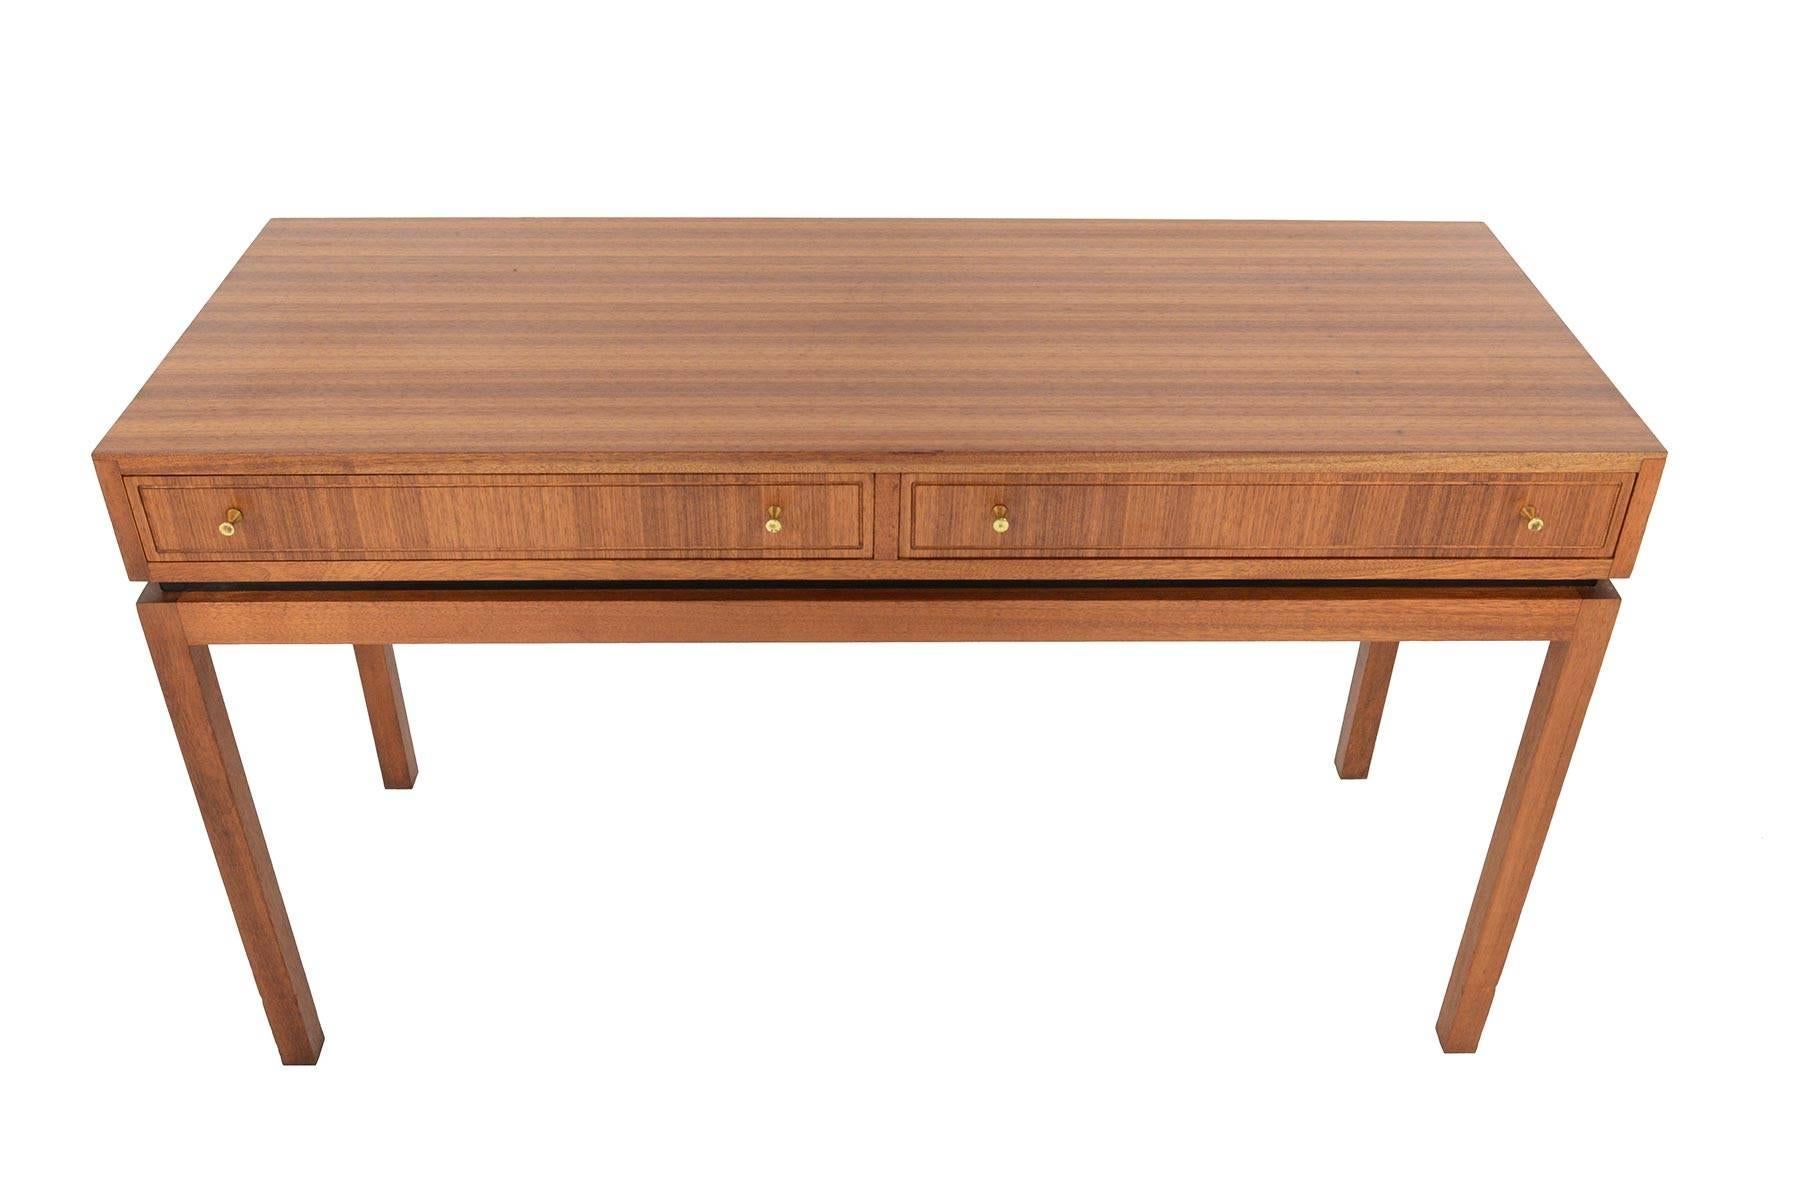 This English modern midcentury console table was designed by Greaves + Thomas in the late 1960s. The beautiful tola case houses two drawers with brass pulls. Stands on tall, mahogany tapered legs. In excellent original condition with typical wear